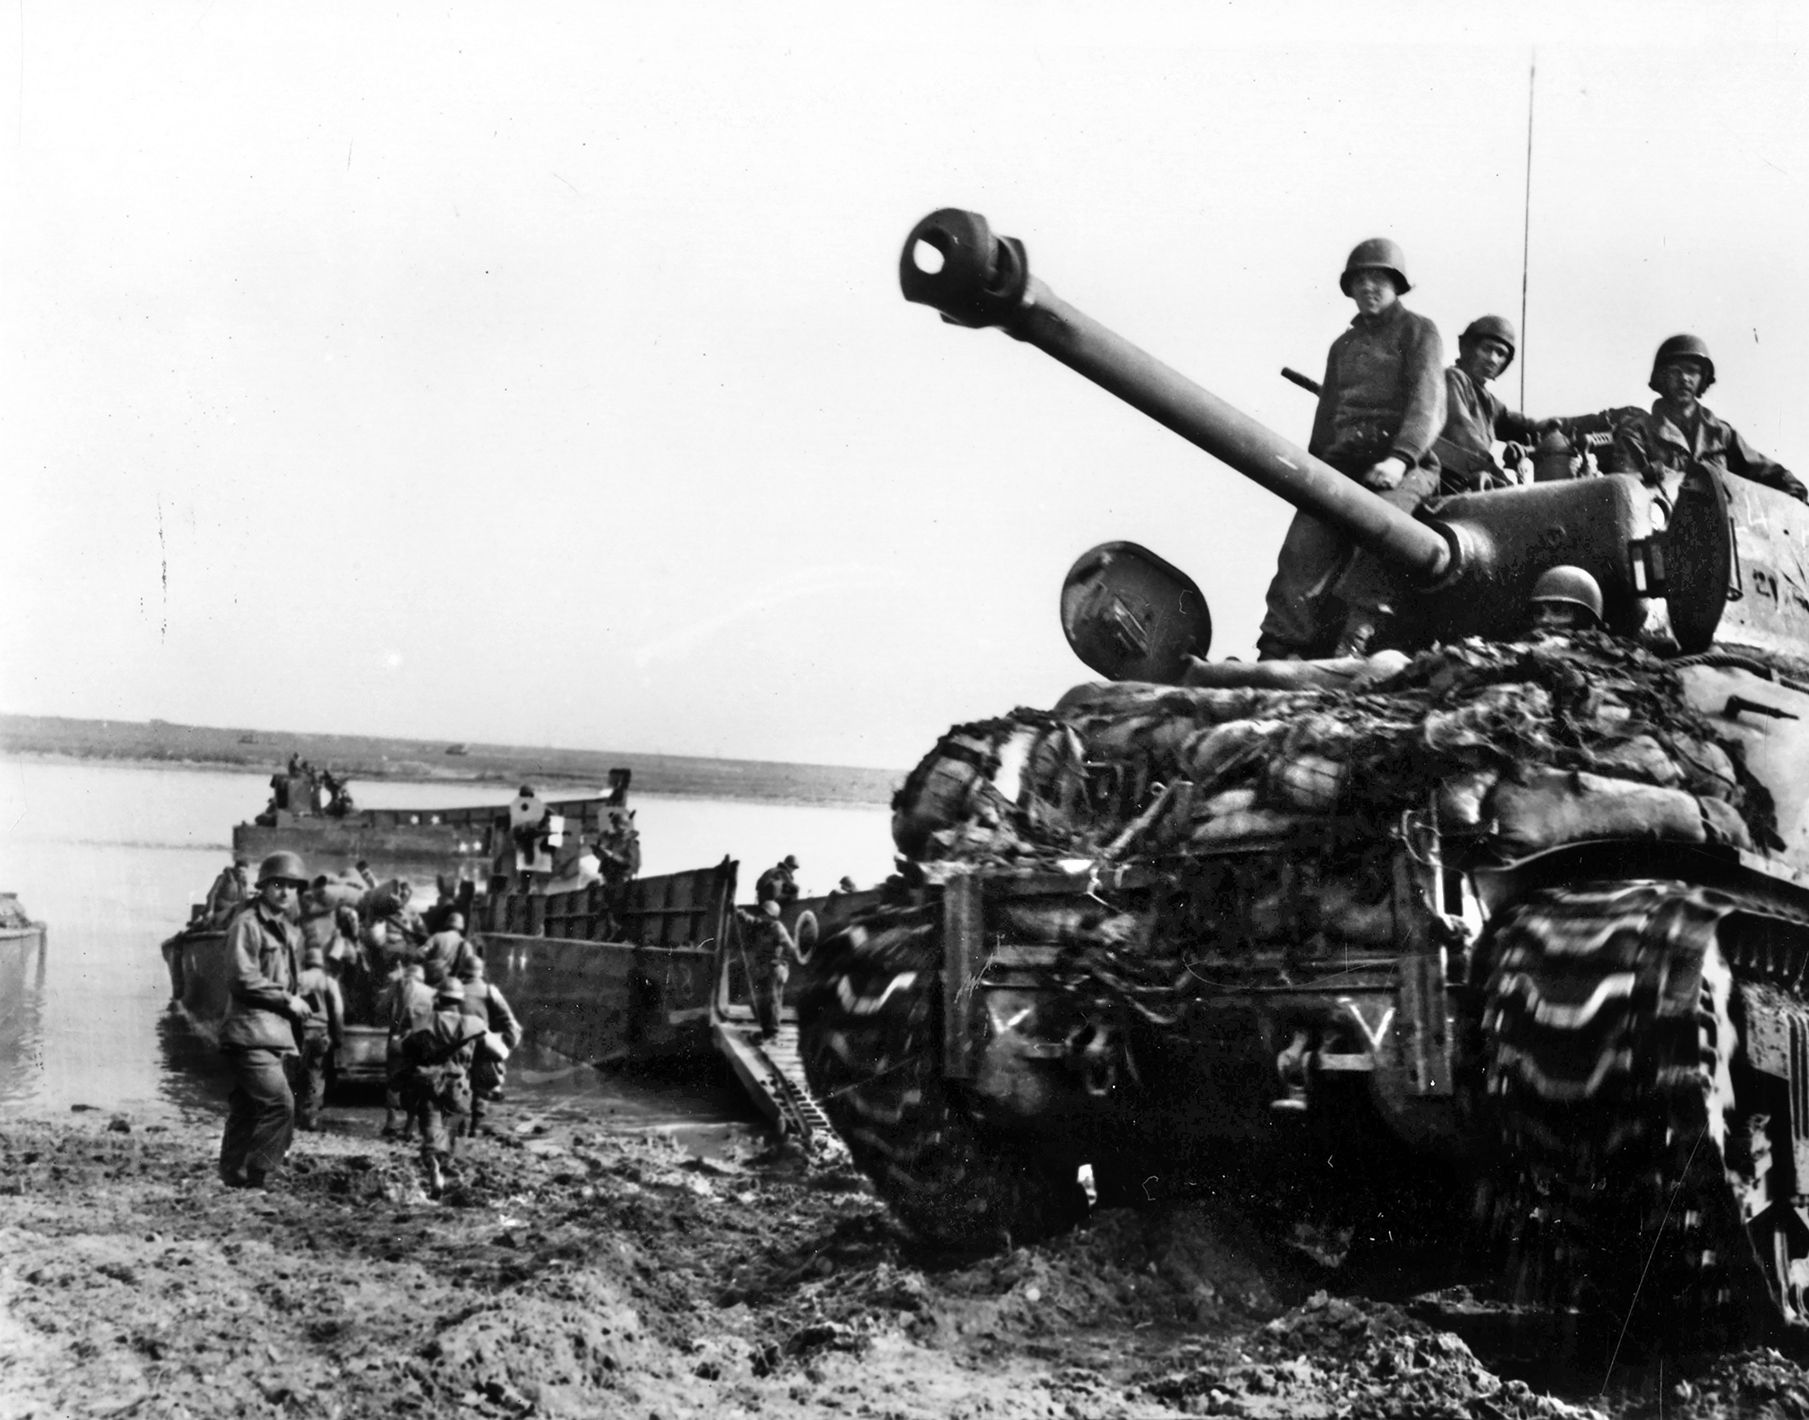 Farther north, British Field Marshal Montgomery pushed his troops, including Simpson's Ninth U.S. Army shown here, across methodically. Patton crowed about beating Monty to the rivers’s eastern bank. 